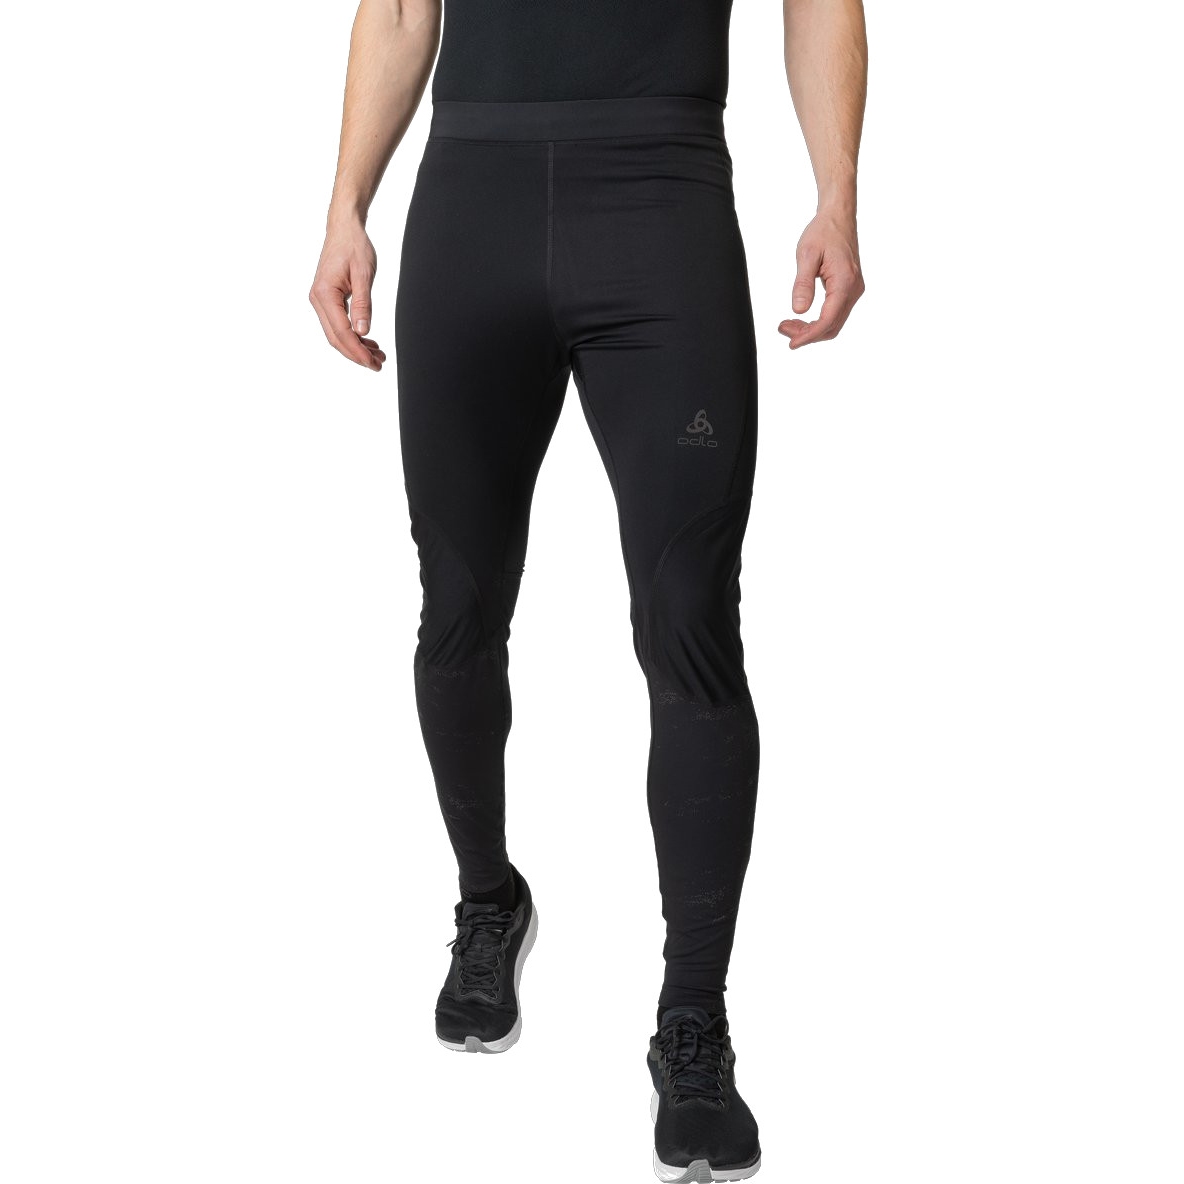 Picture of Odlo Zeroweight Warm Reflective Running Tights Men - black